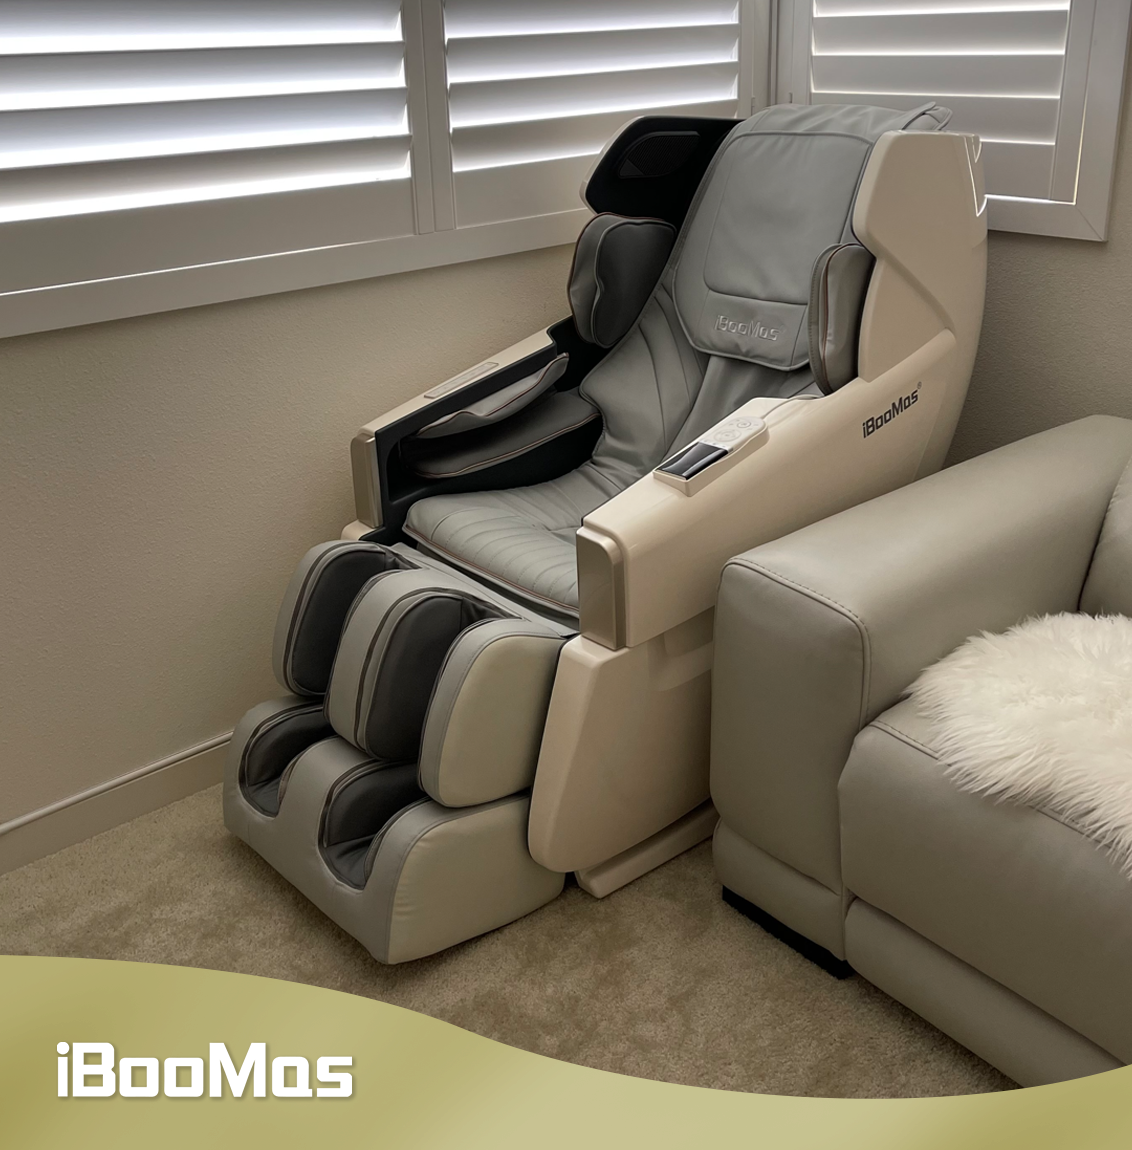 R8603 Massage Chair Review